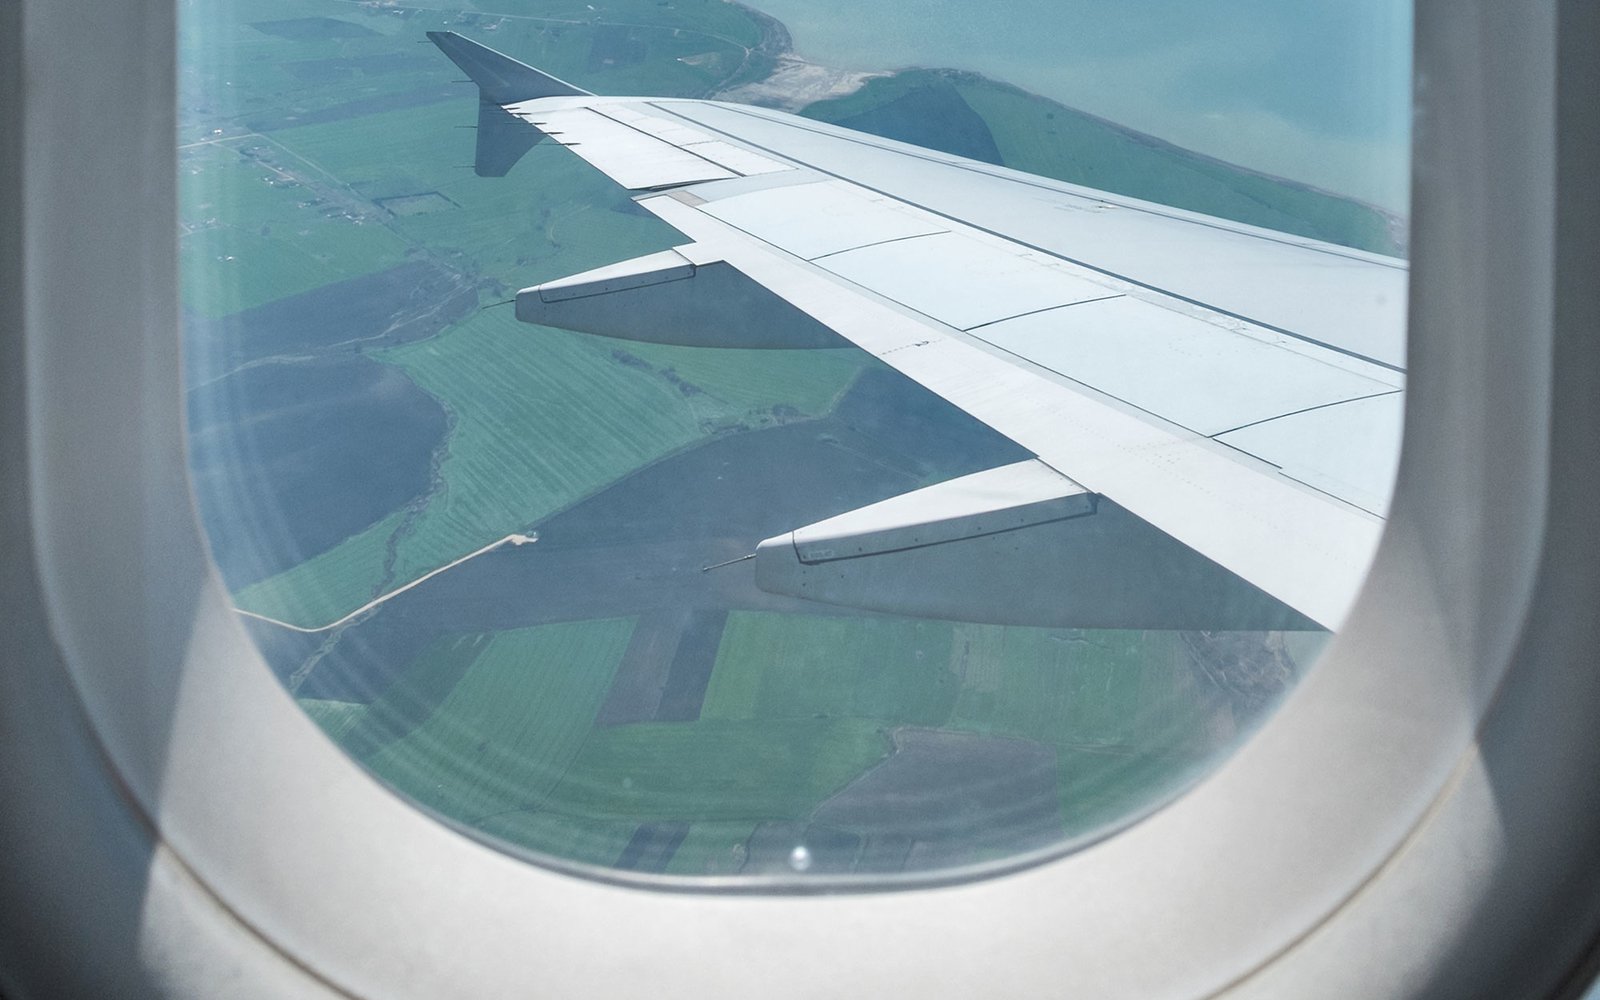 Ever Wondered Why Thereâ€™s That Little Hole In Airplane Windows? Hereâ€™s Why